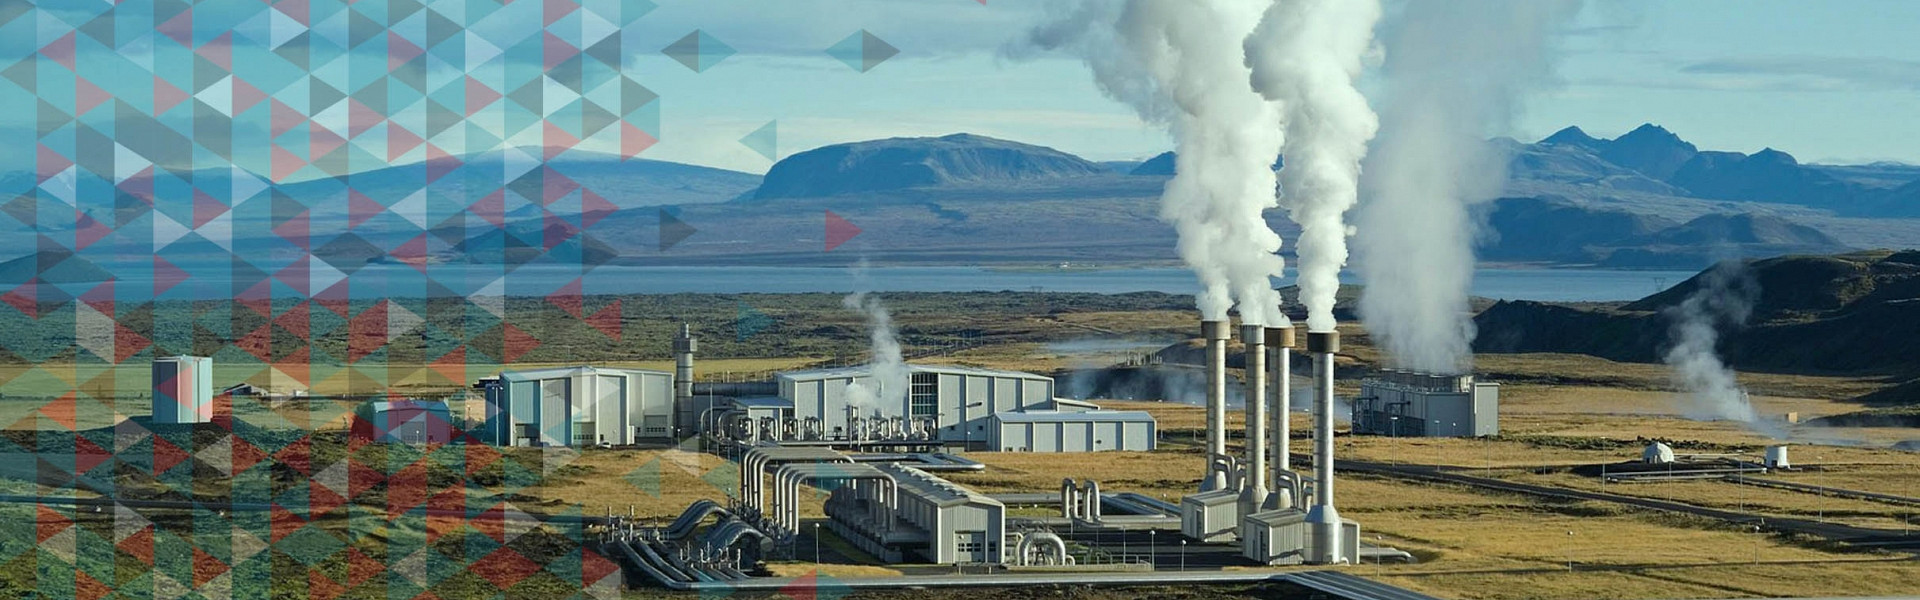 REPORT, event SYSTEM INTEGRATION - GAS MEETS GEOTHERMAL